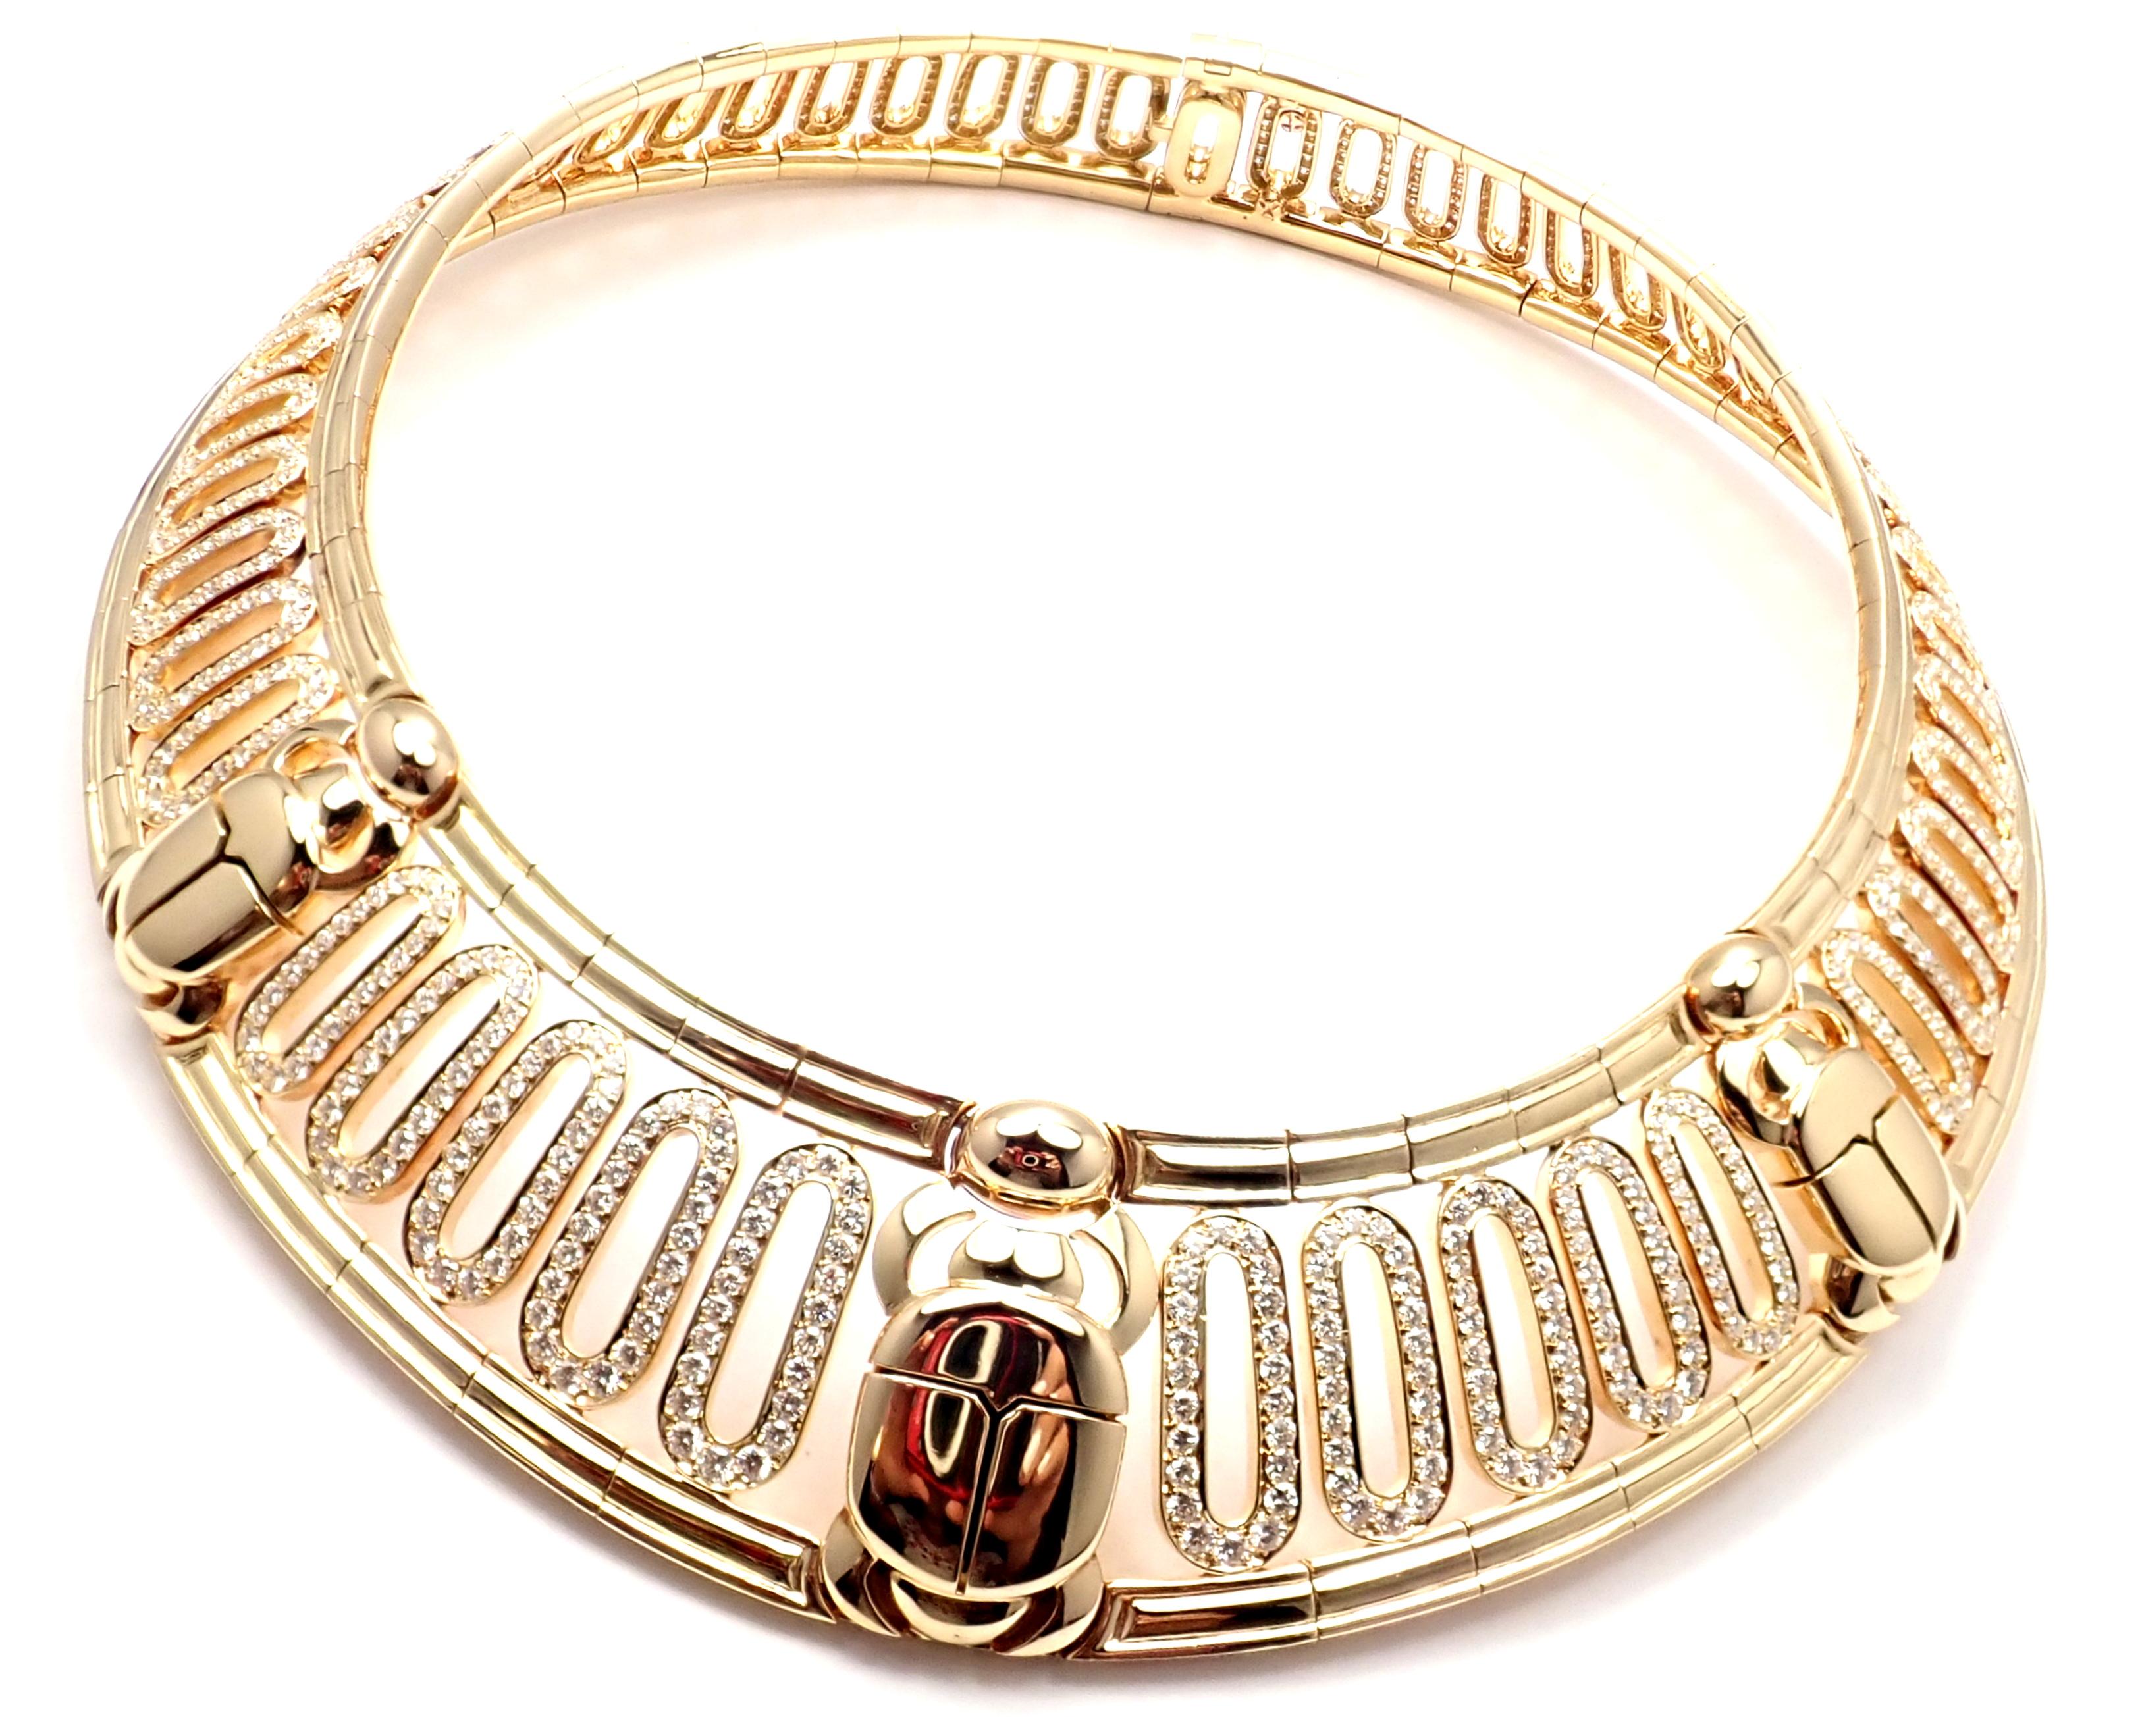 Gorgeous 18k Yellow Gold Scarab Collar Choker Necklace by Cartier. 
With 916 round brilliant cut diamonds VVS1 clarity, E color total weight approx. 20.72ct
This necklace comes with an original Cartier box. 
Details: 
Length: 14.5